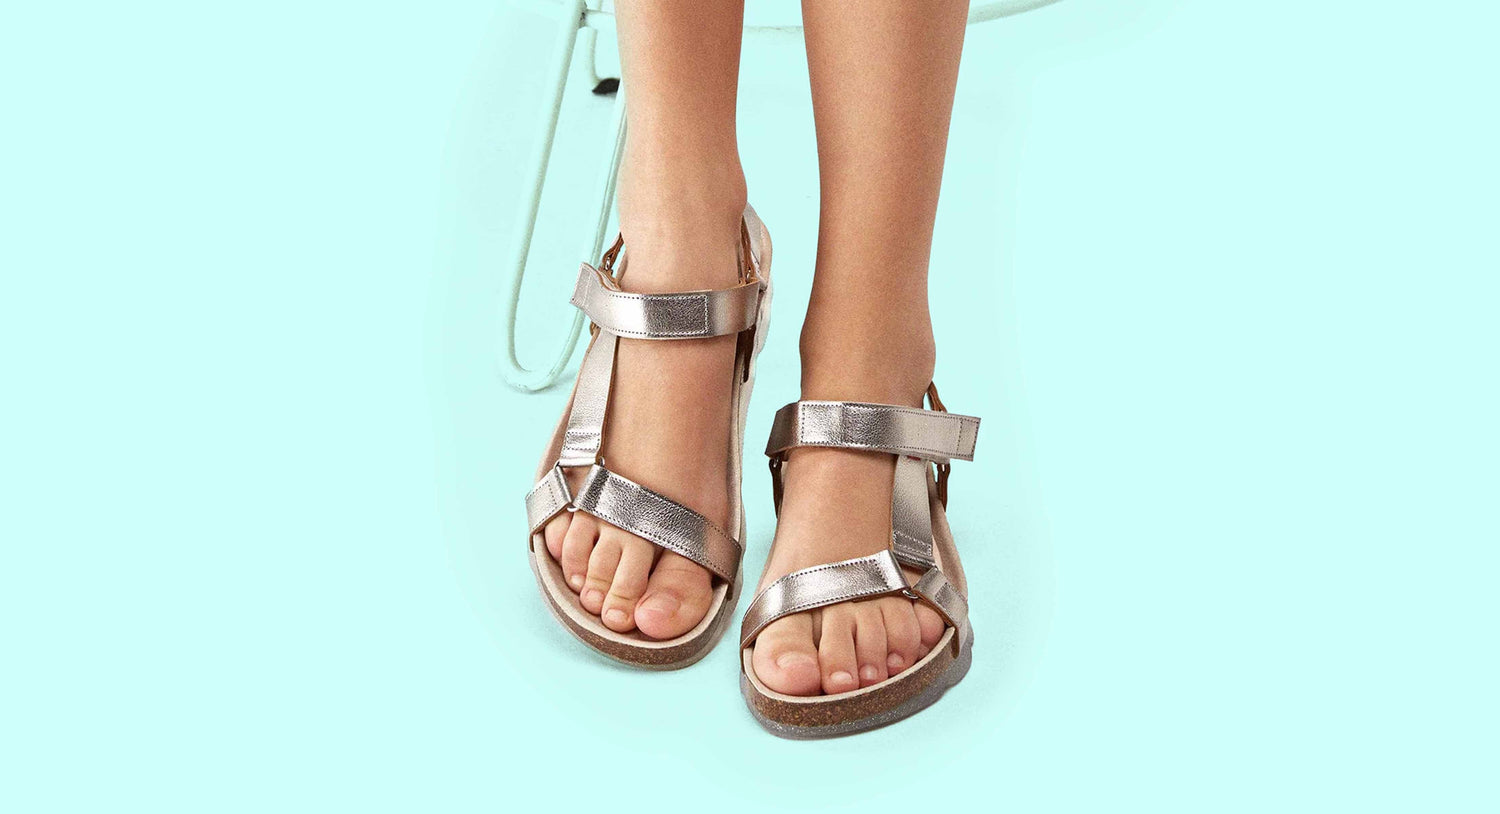 Metallic sandals will be a trend this 2023